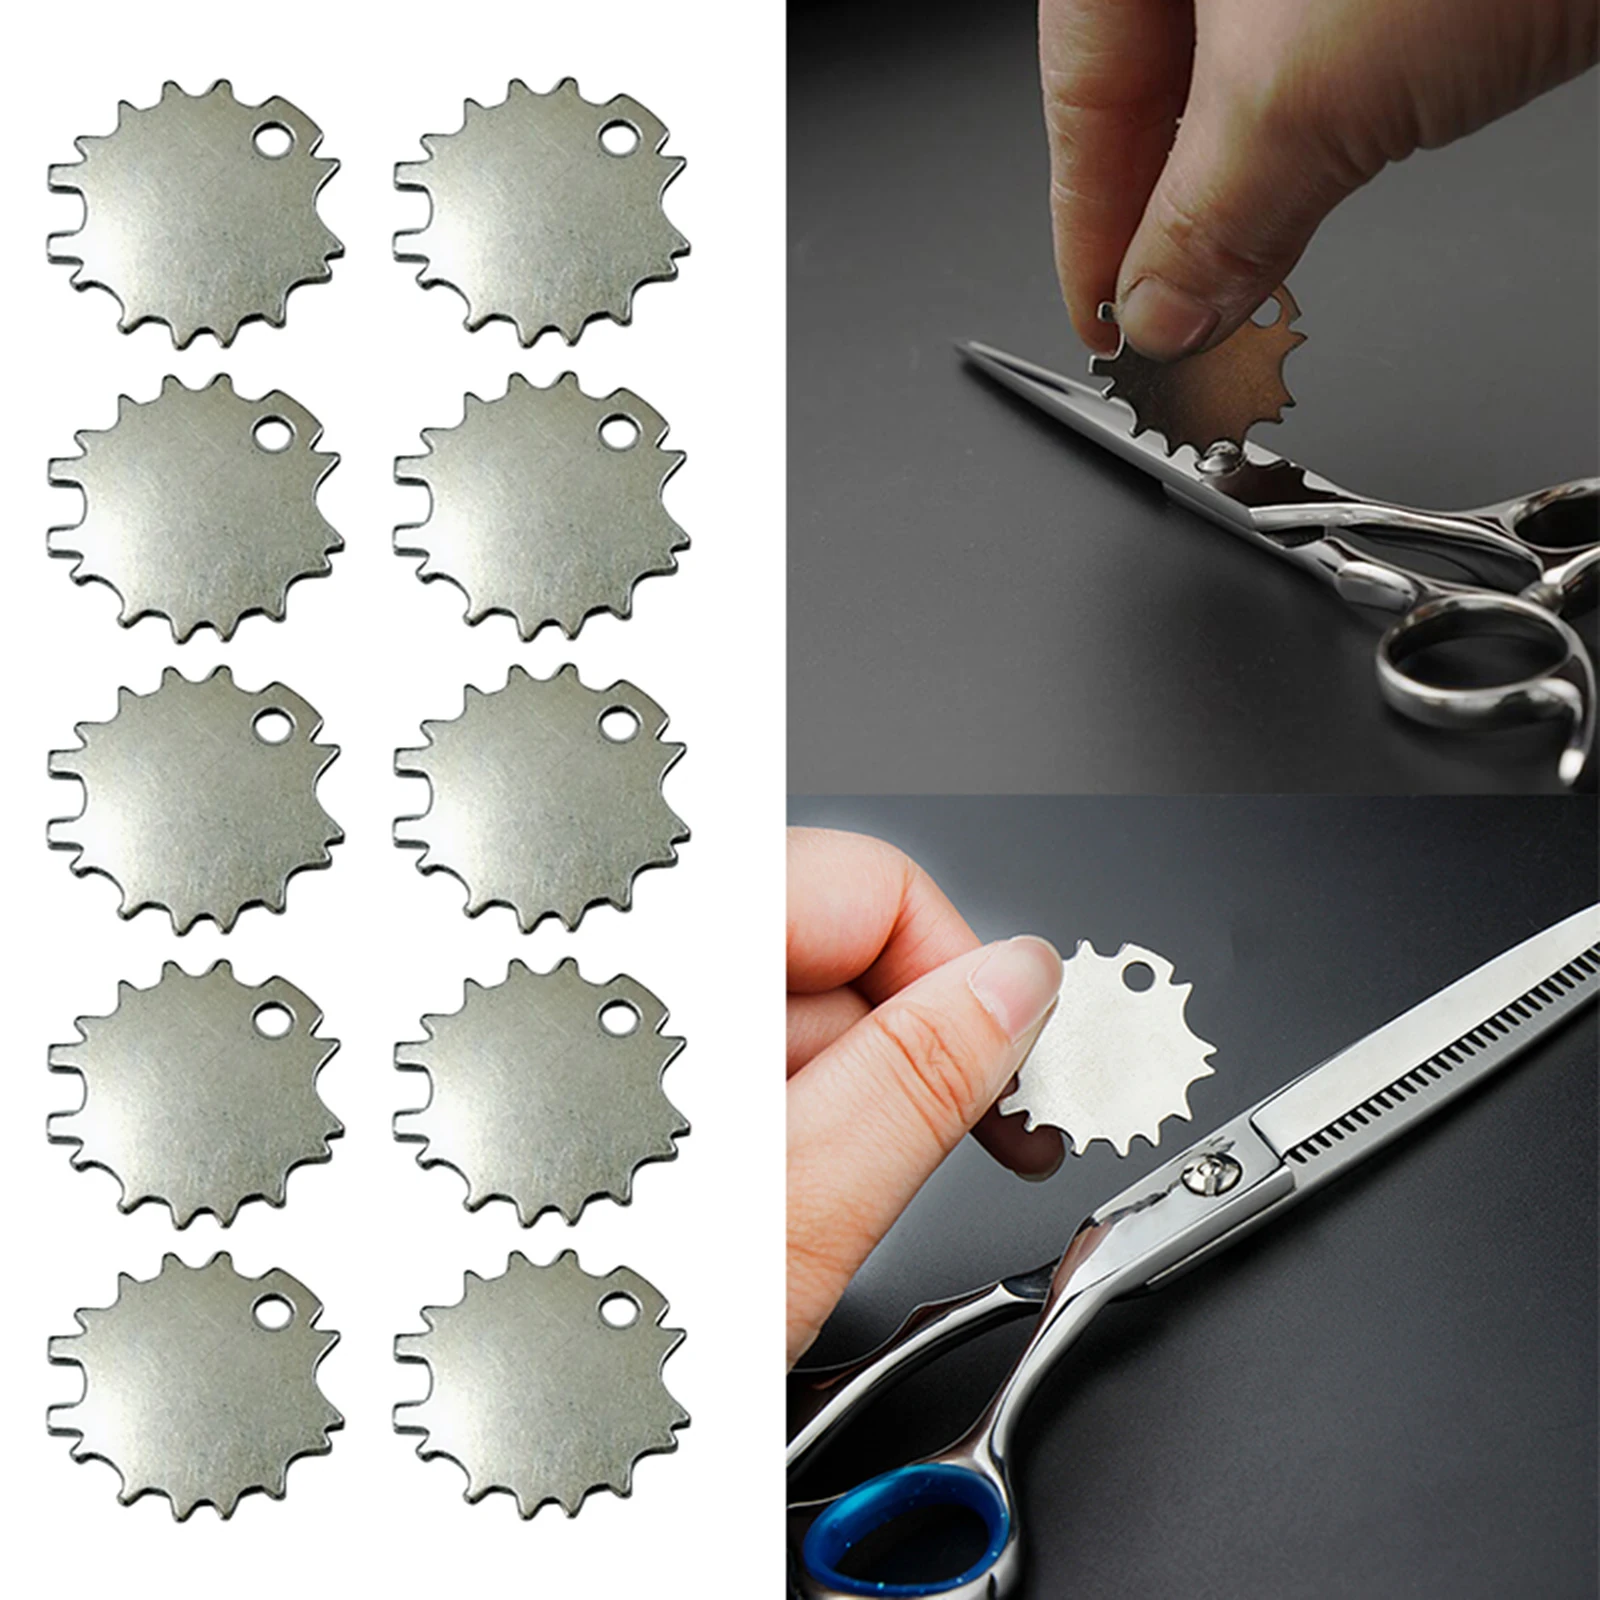 10pcs Shear & Scissor Adjustment Tool Fits Beauty & Grooming Shears for  for Wolff for 